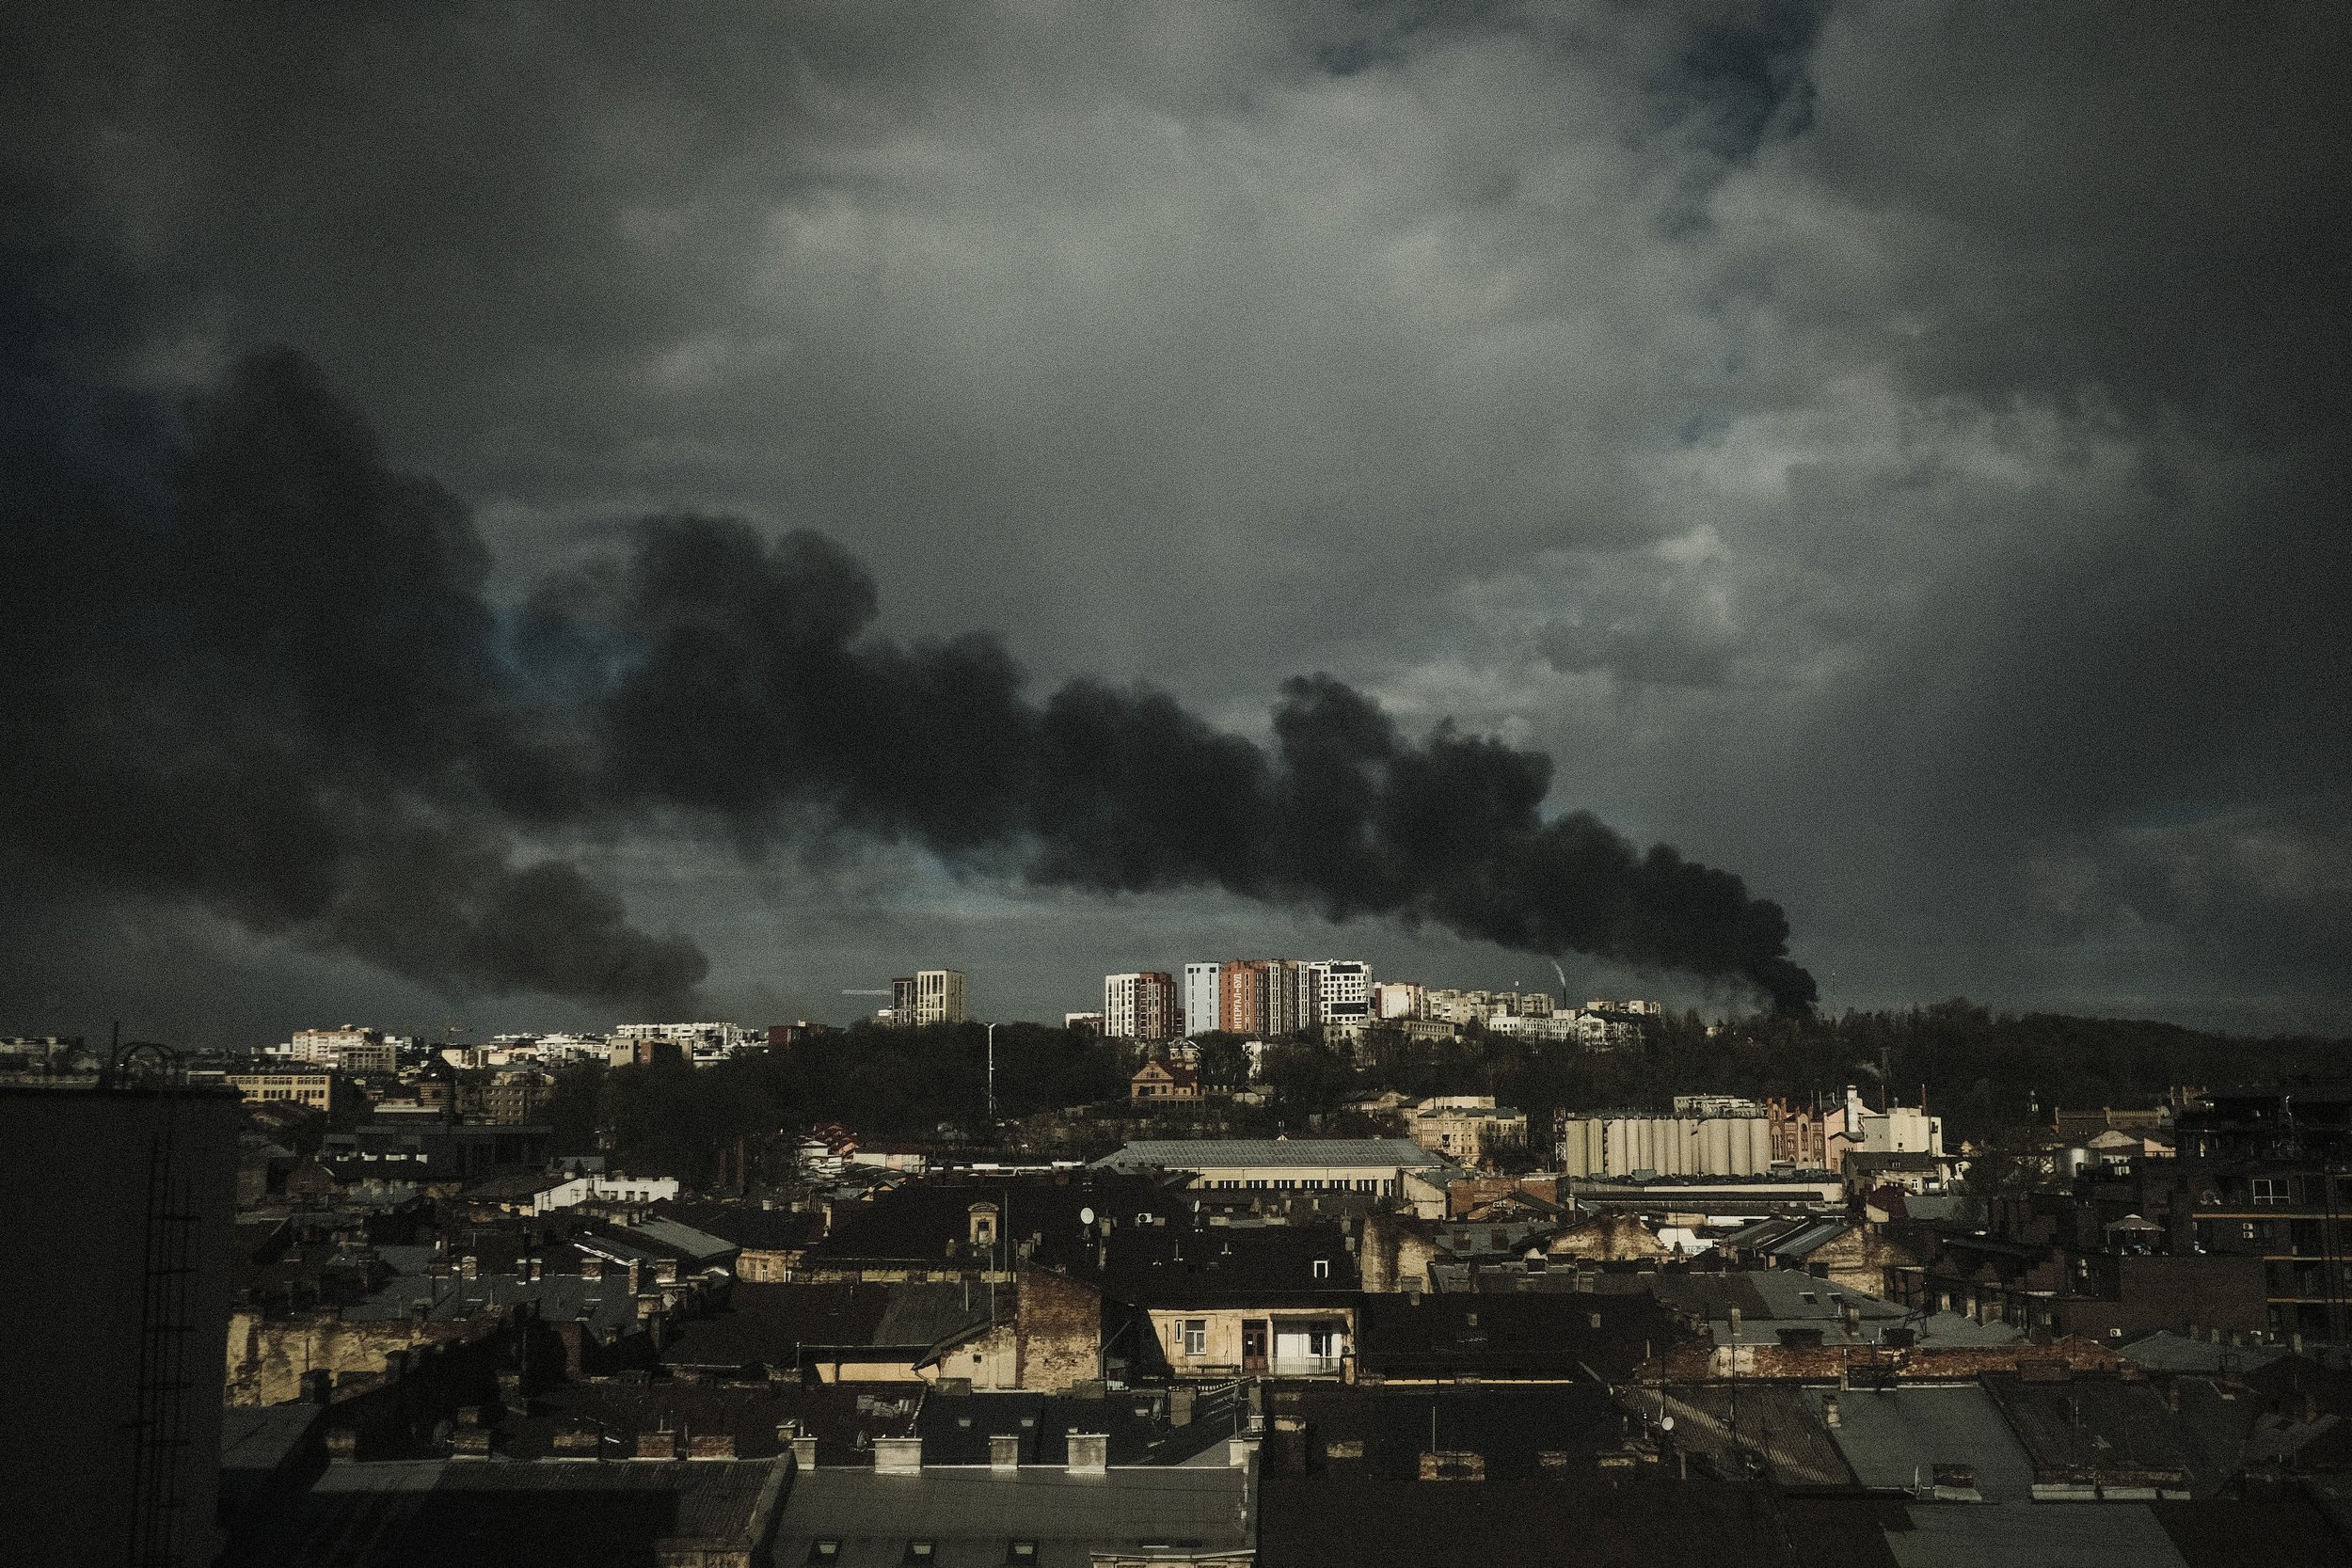  Smoke rises over Lviv, Ukraine following a Russian missile attack that killed 11 people on April 18, 2022. The city of Lviv which is located in the western part of the country near the border with Poland has served as a hub for refugees and humanita